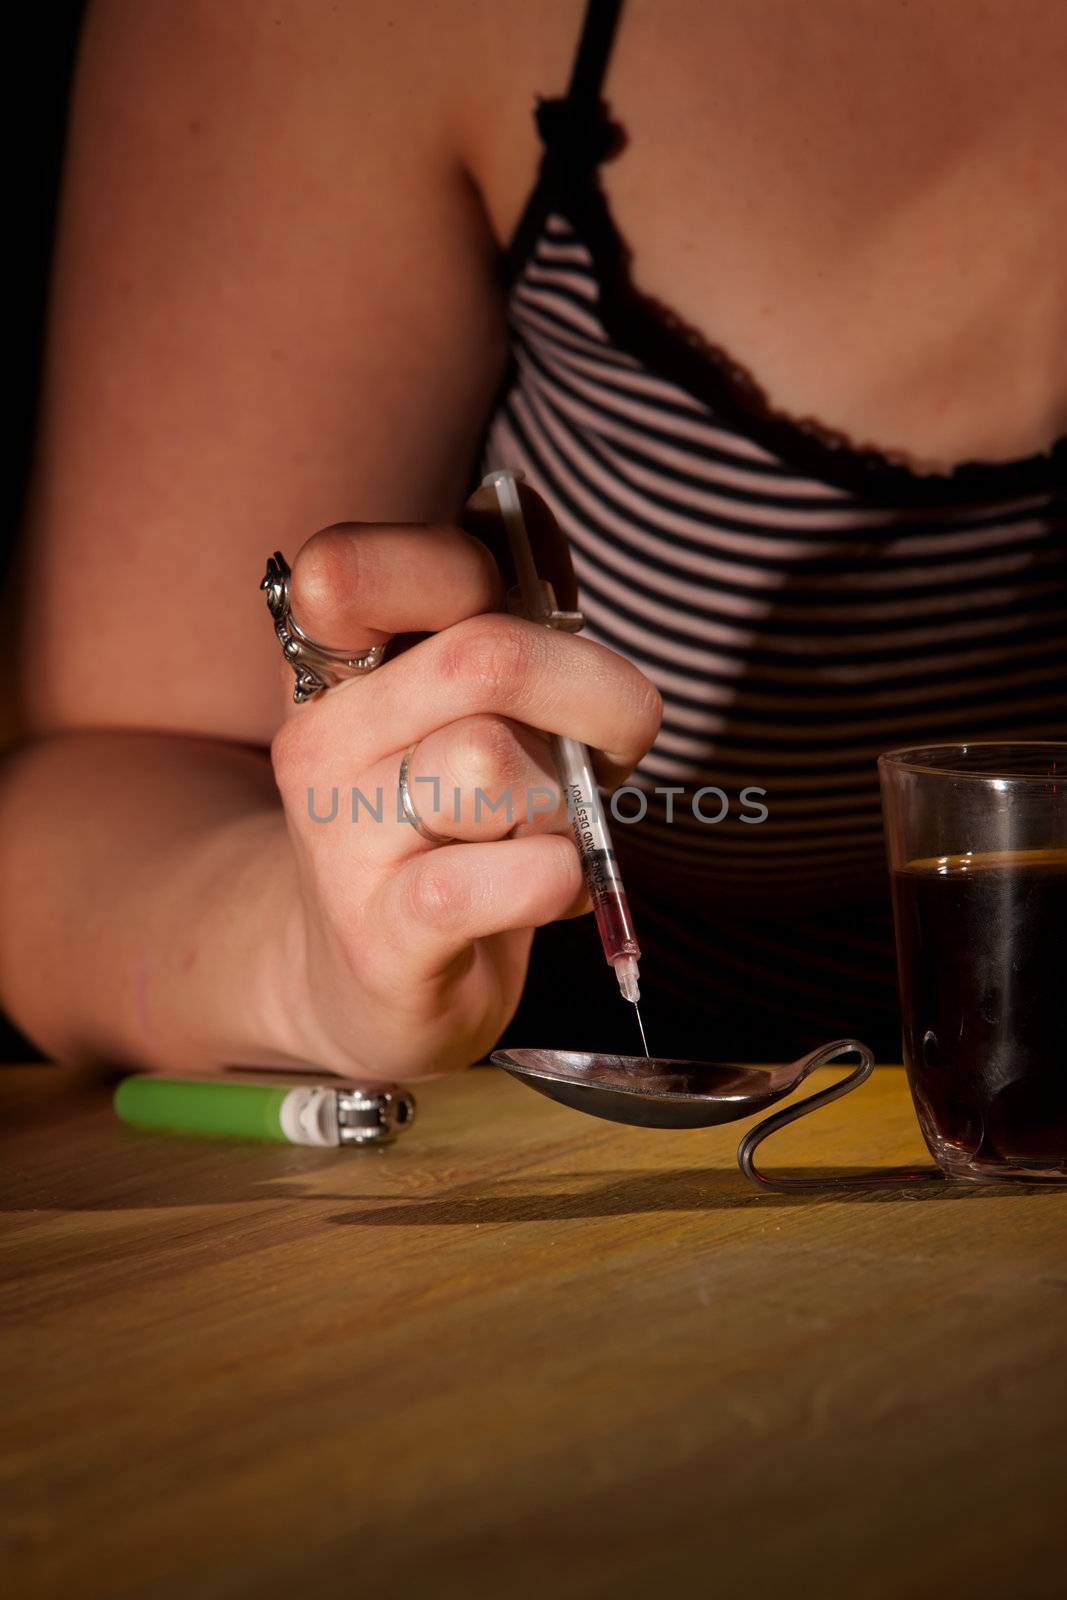 Drawing black tar heroin into a needle by Creatista